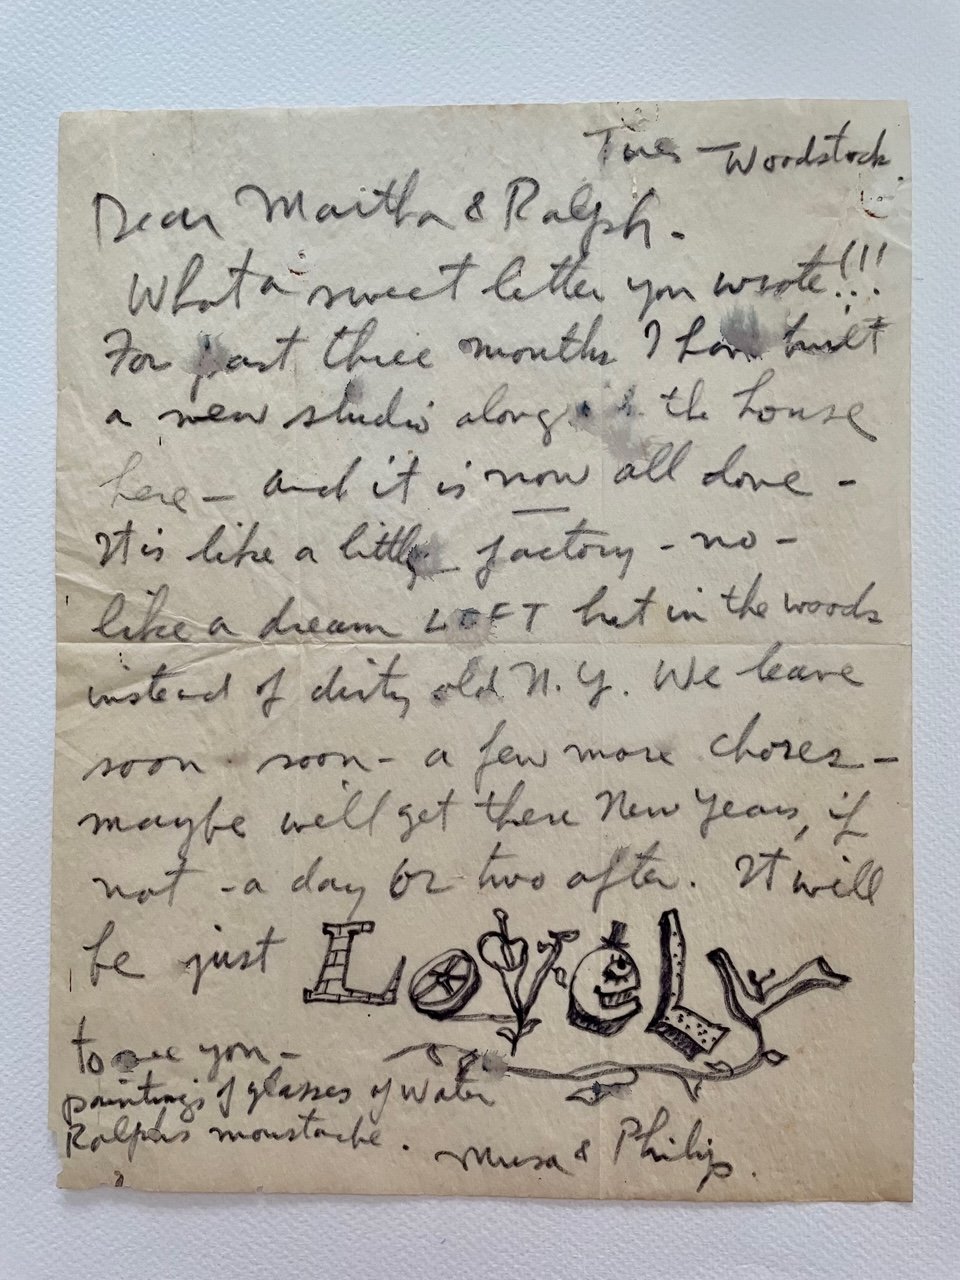  LETTER  Undated without original envelope, circa December 1967 as Guston completed work on his new Woodstock studio December 25, 1967 according to the “Philip Guston Now” catalogue timeline.  Dear Martha &amp; Ralph —  What a sweet letter you wrote!